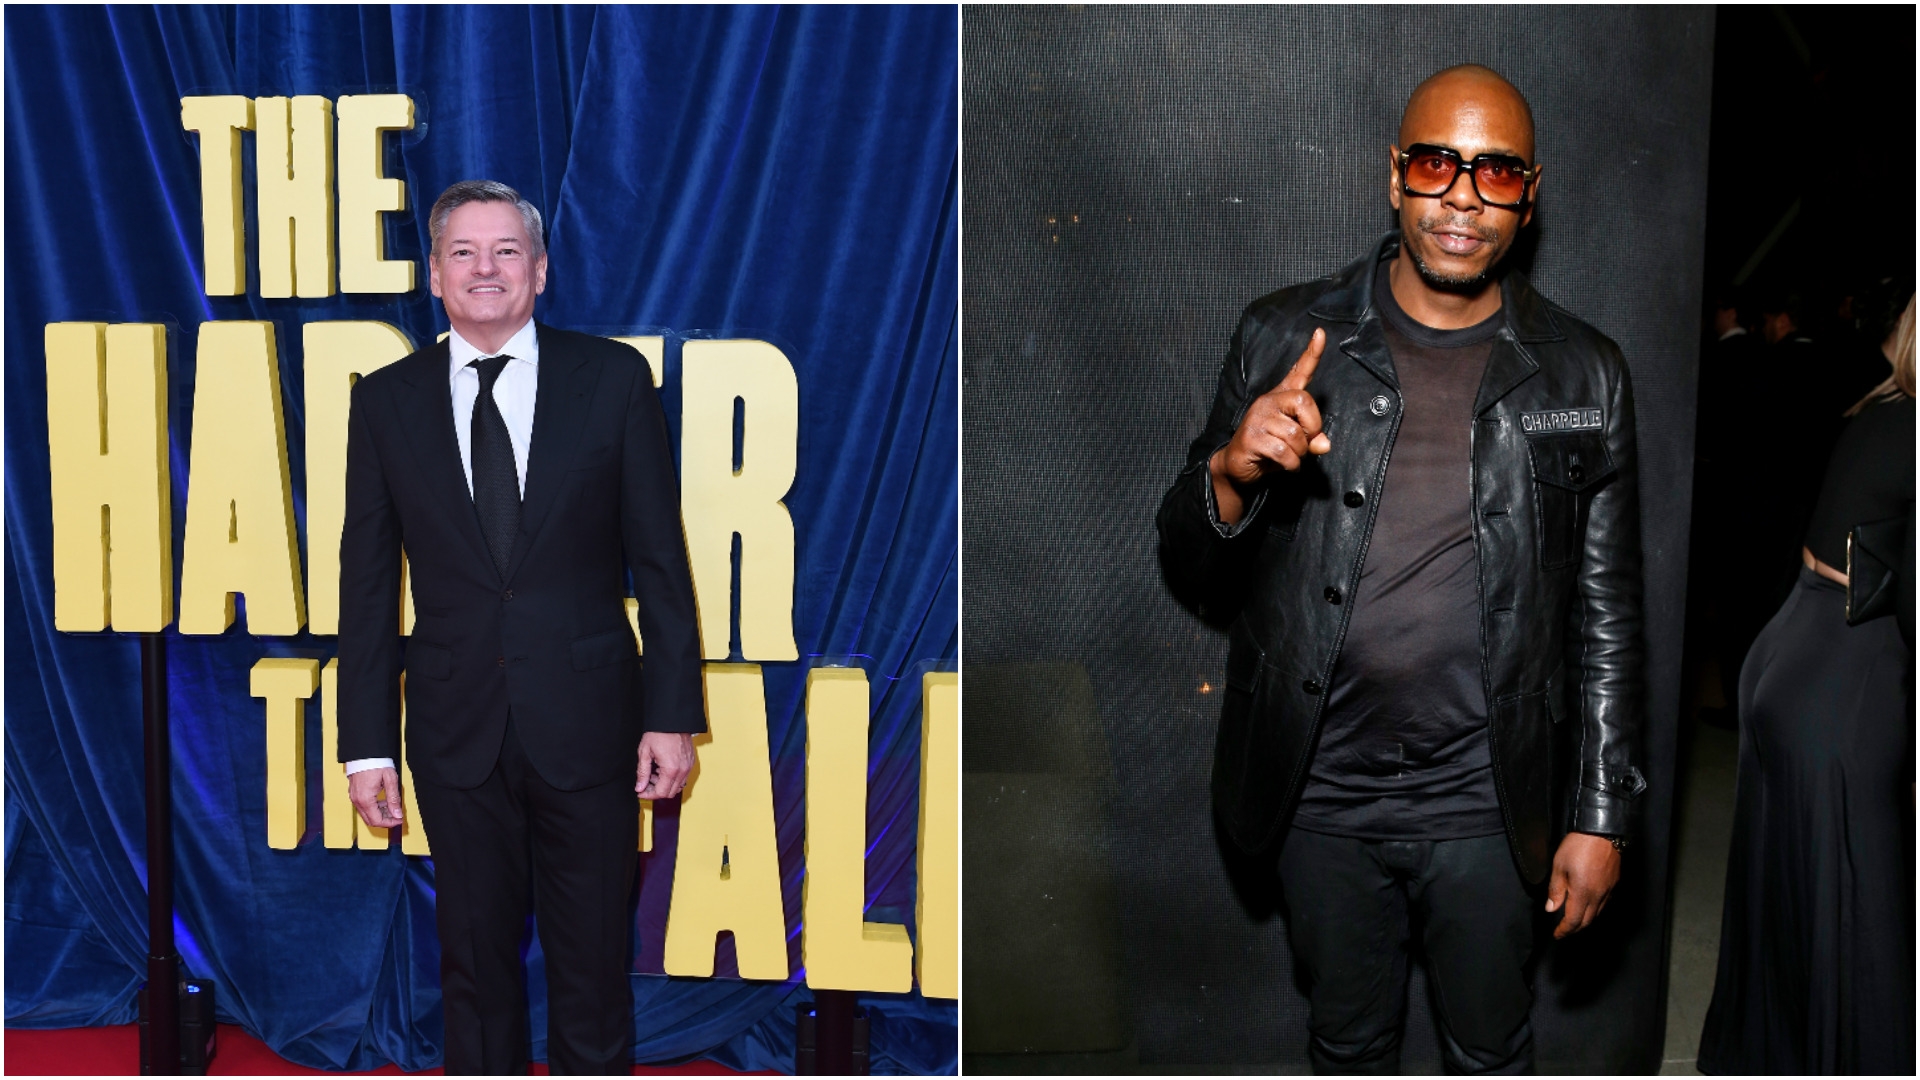 Netflix co-CEO Ted Sarandos says he “screwed up” his response to Dave Chappelle backlash